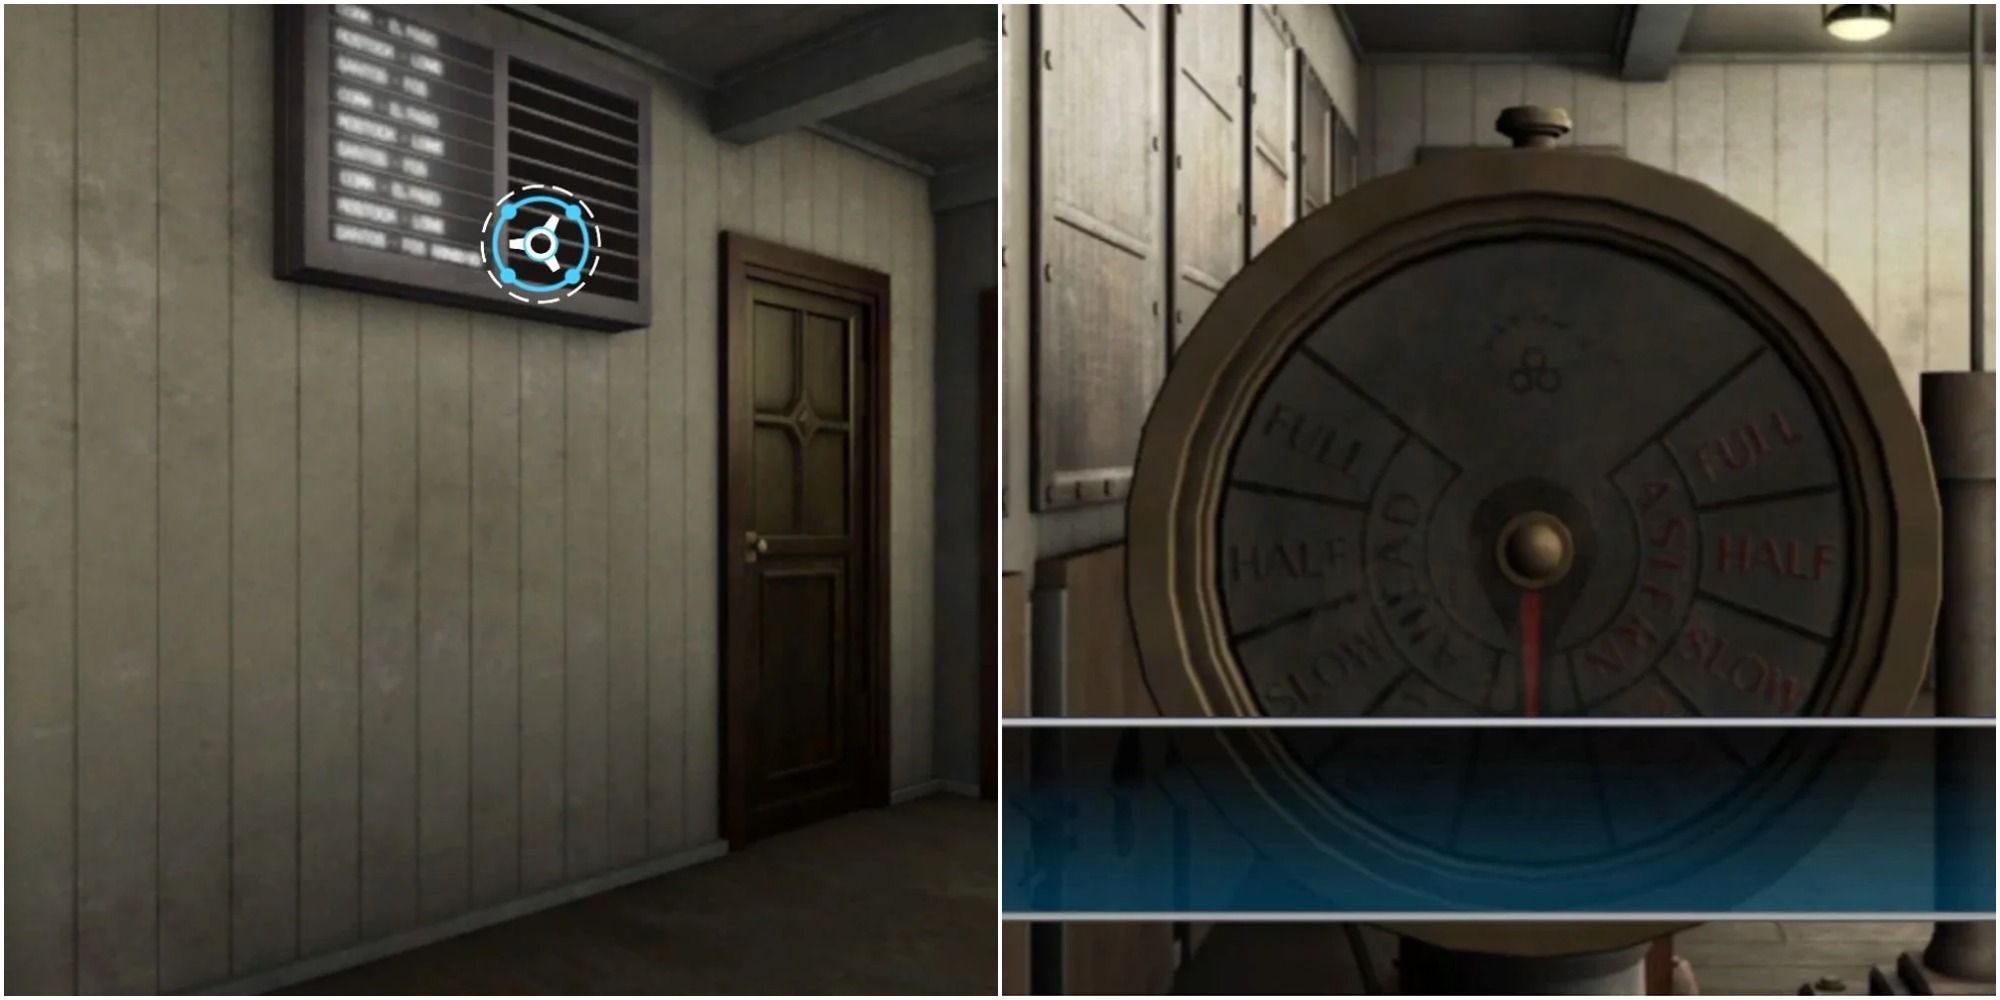 A split image showing a door on the left and a device on the right.